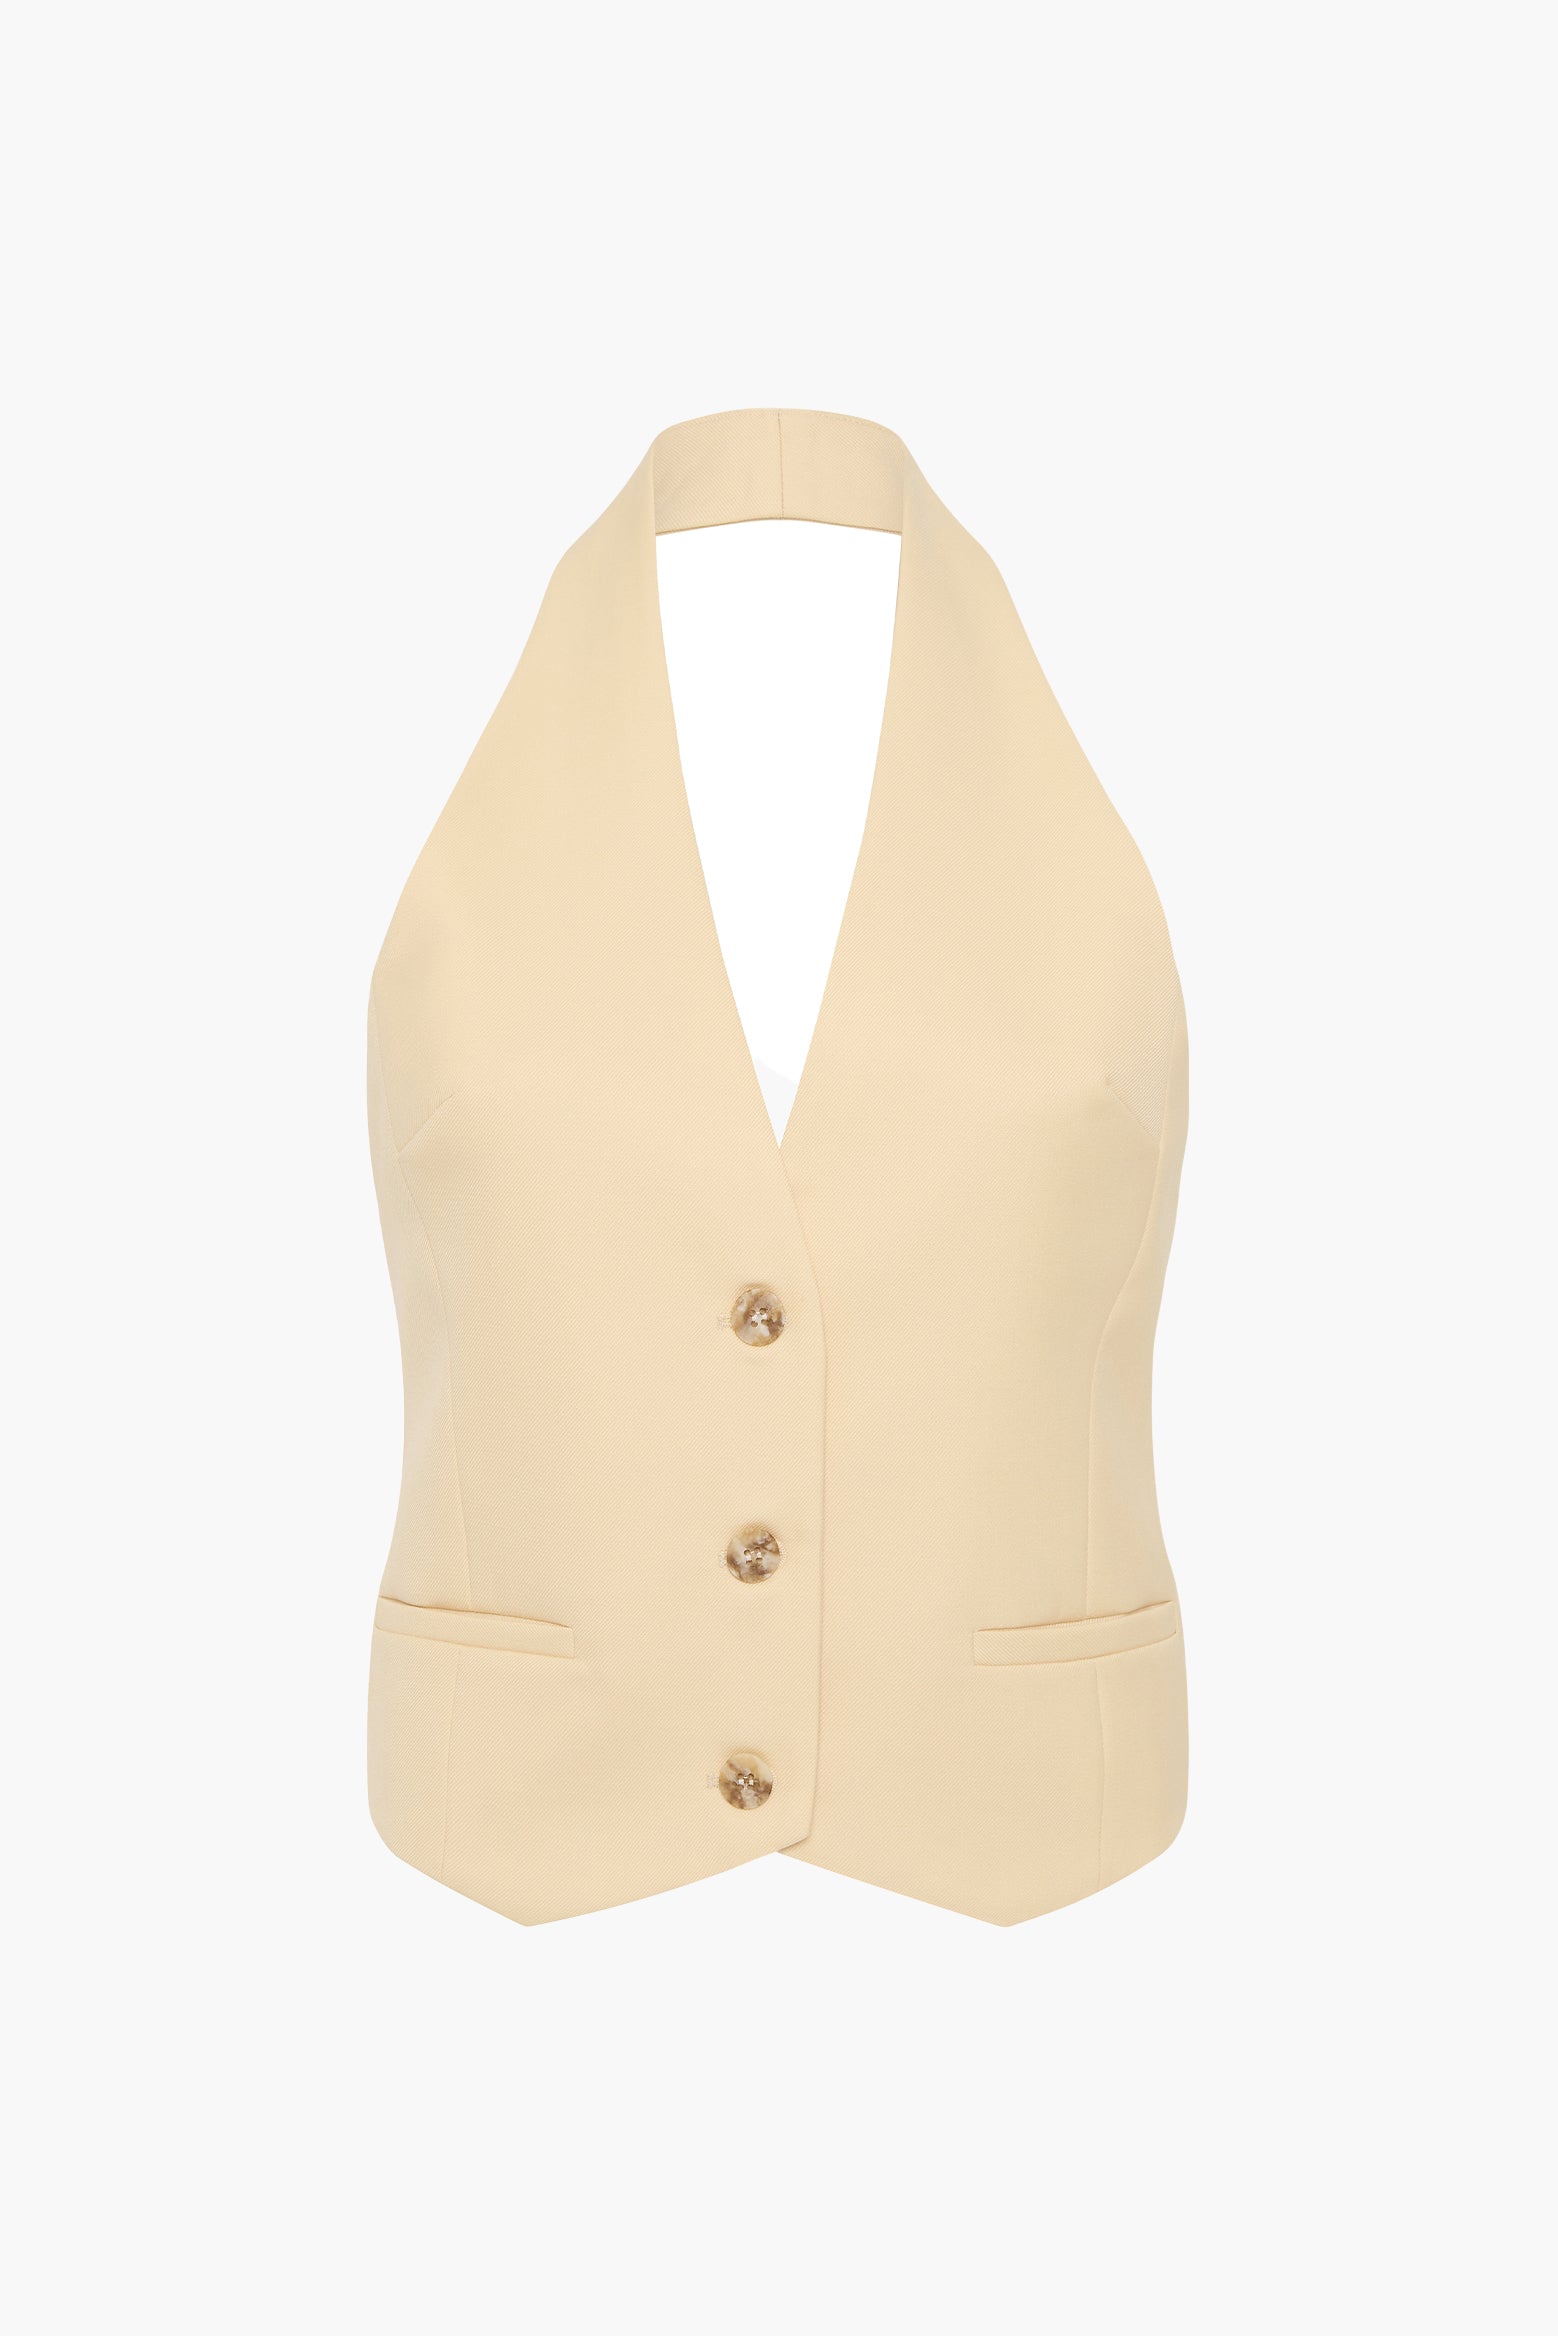 ESSE Delphi Waistcoat in Butter available at The New Trend Australia.